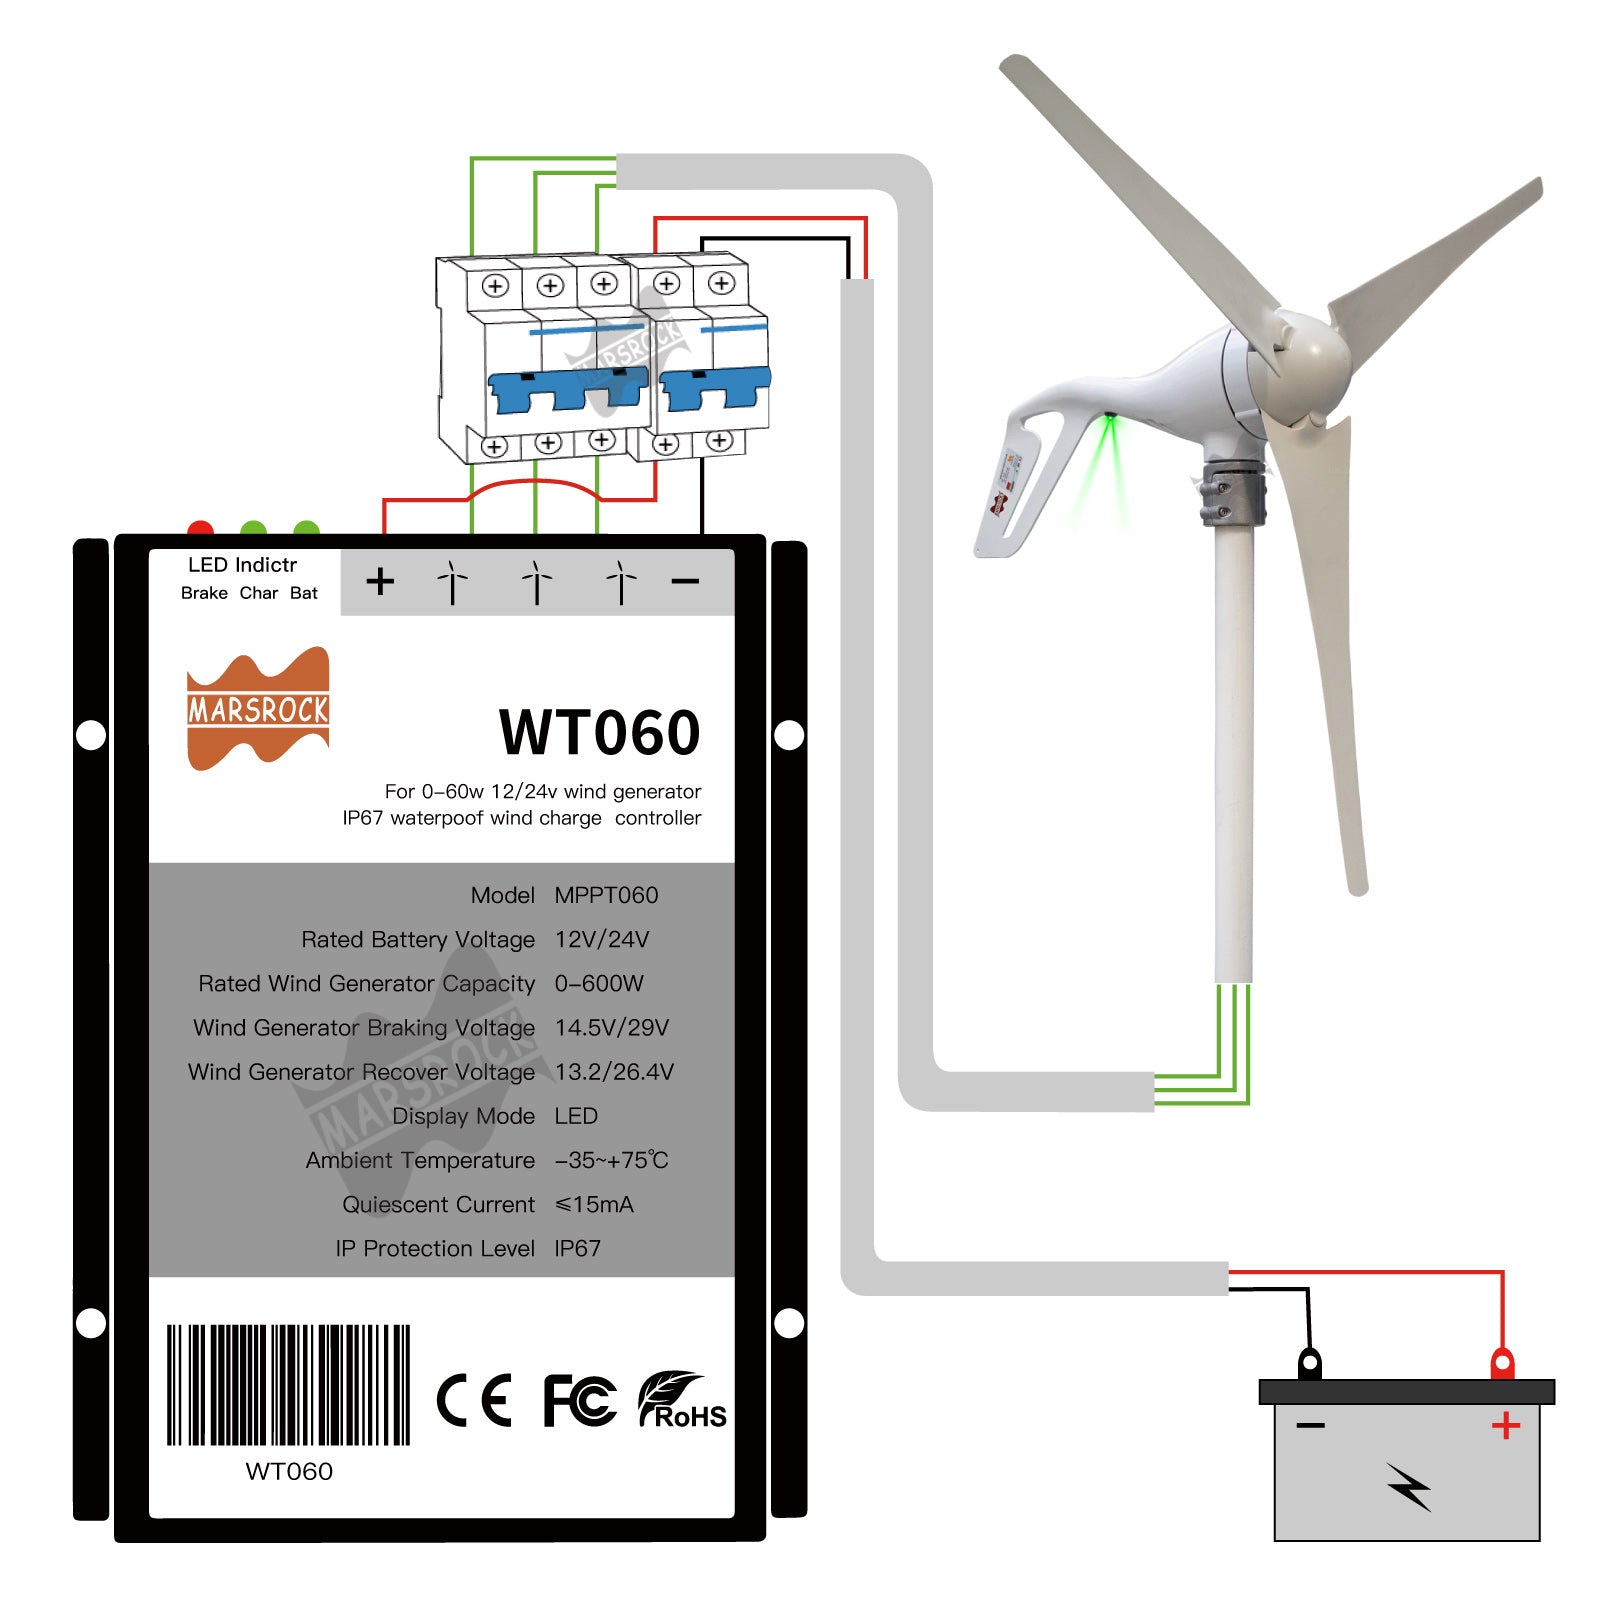 Wind Turbine Generator, 400W Power Output, Home Use Suitable